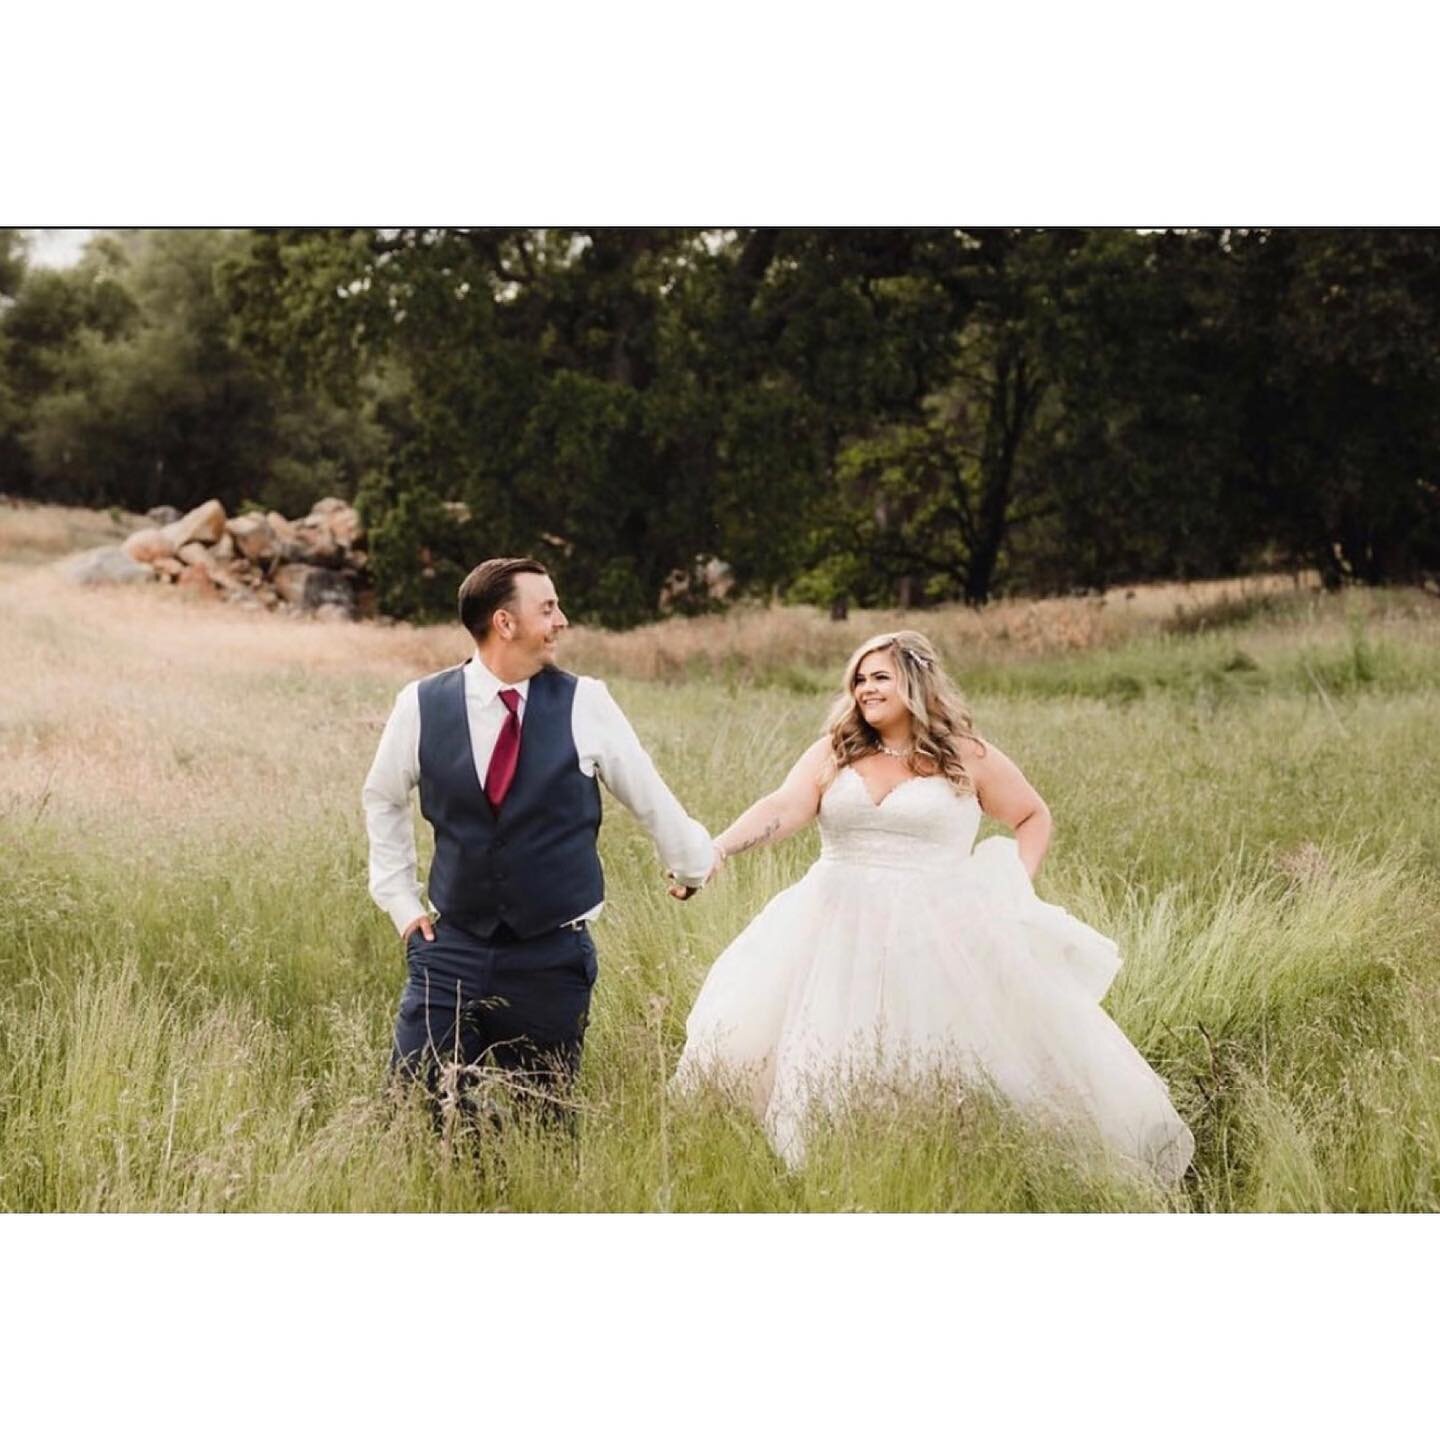 Still looking for a venue for your 2022 wedding?! Make sure to reach out to @zunivineyards 🌿 Zuni Vineyards is a beautiful vineyard setting with a capacity if 250 people. A vintage, rustic barn and gathering space ideal for the wedding if your dream